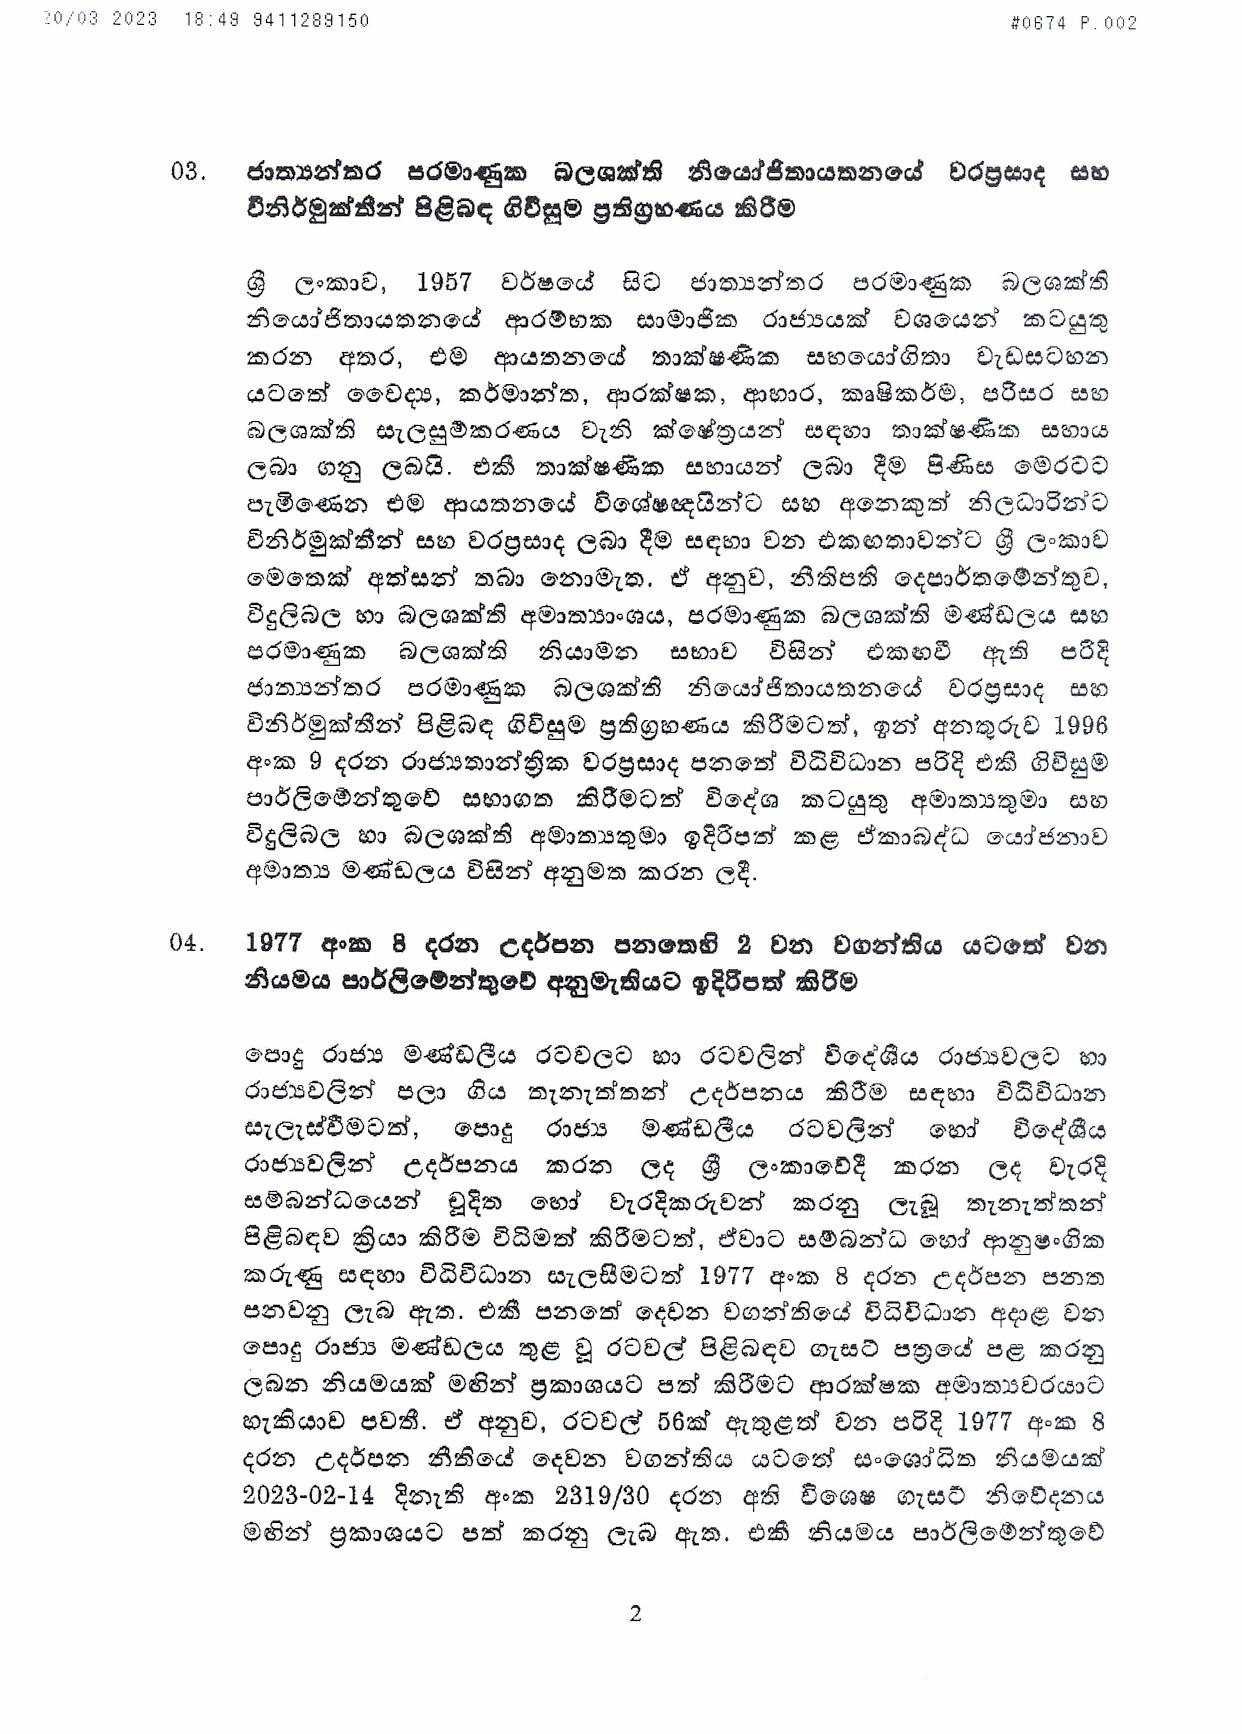 Cabinet Decision on 20.03.2023 page 002